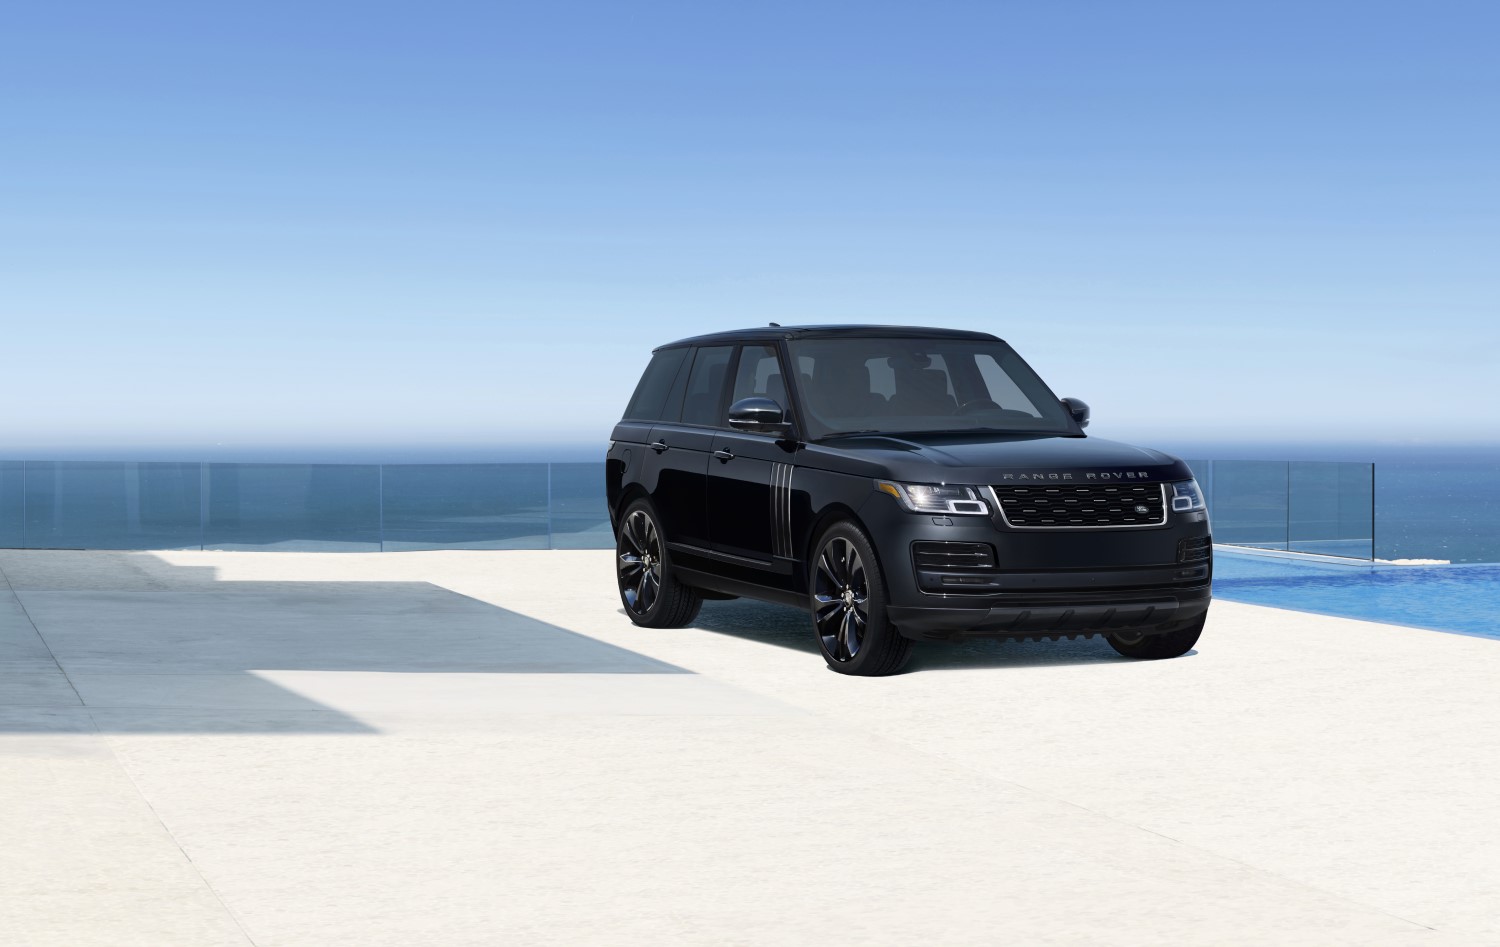 New Land Rover available in Roseville, CA at Land Rover Rocklin